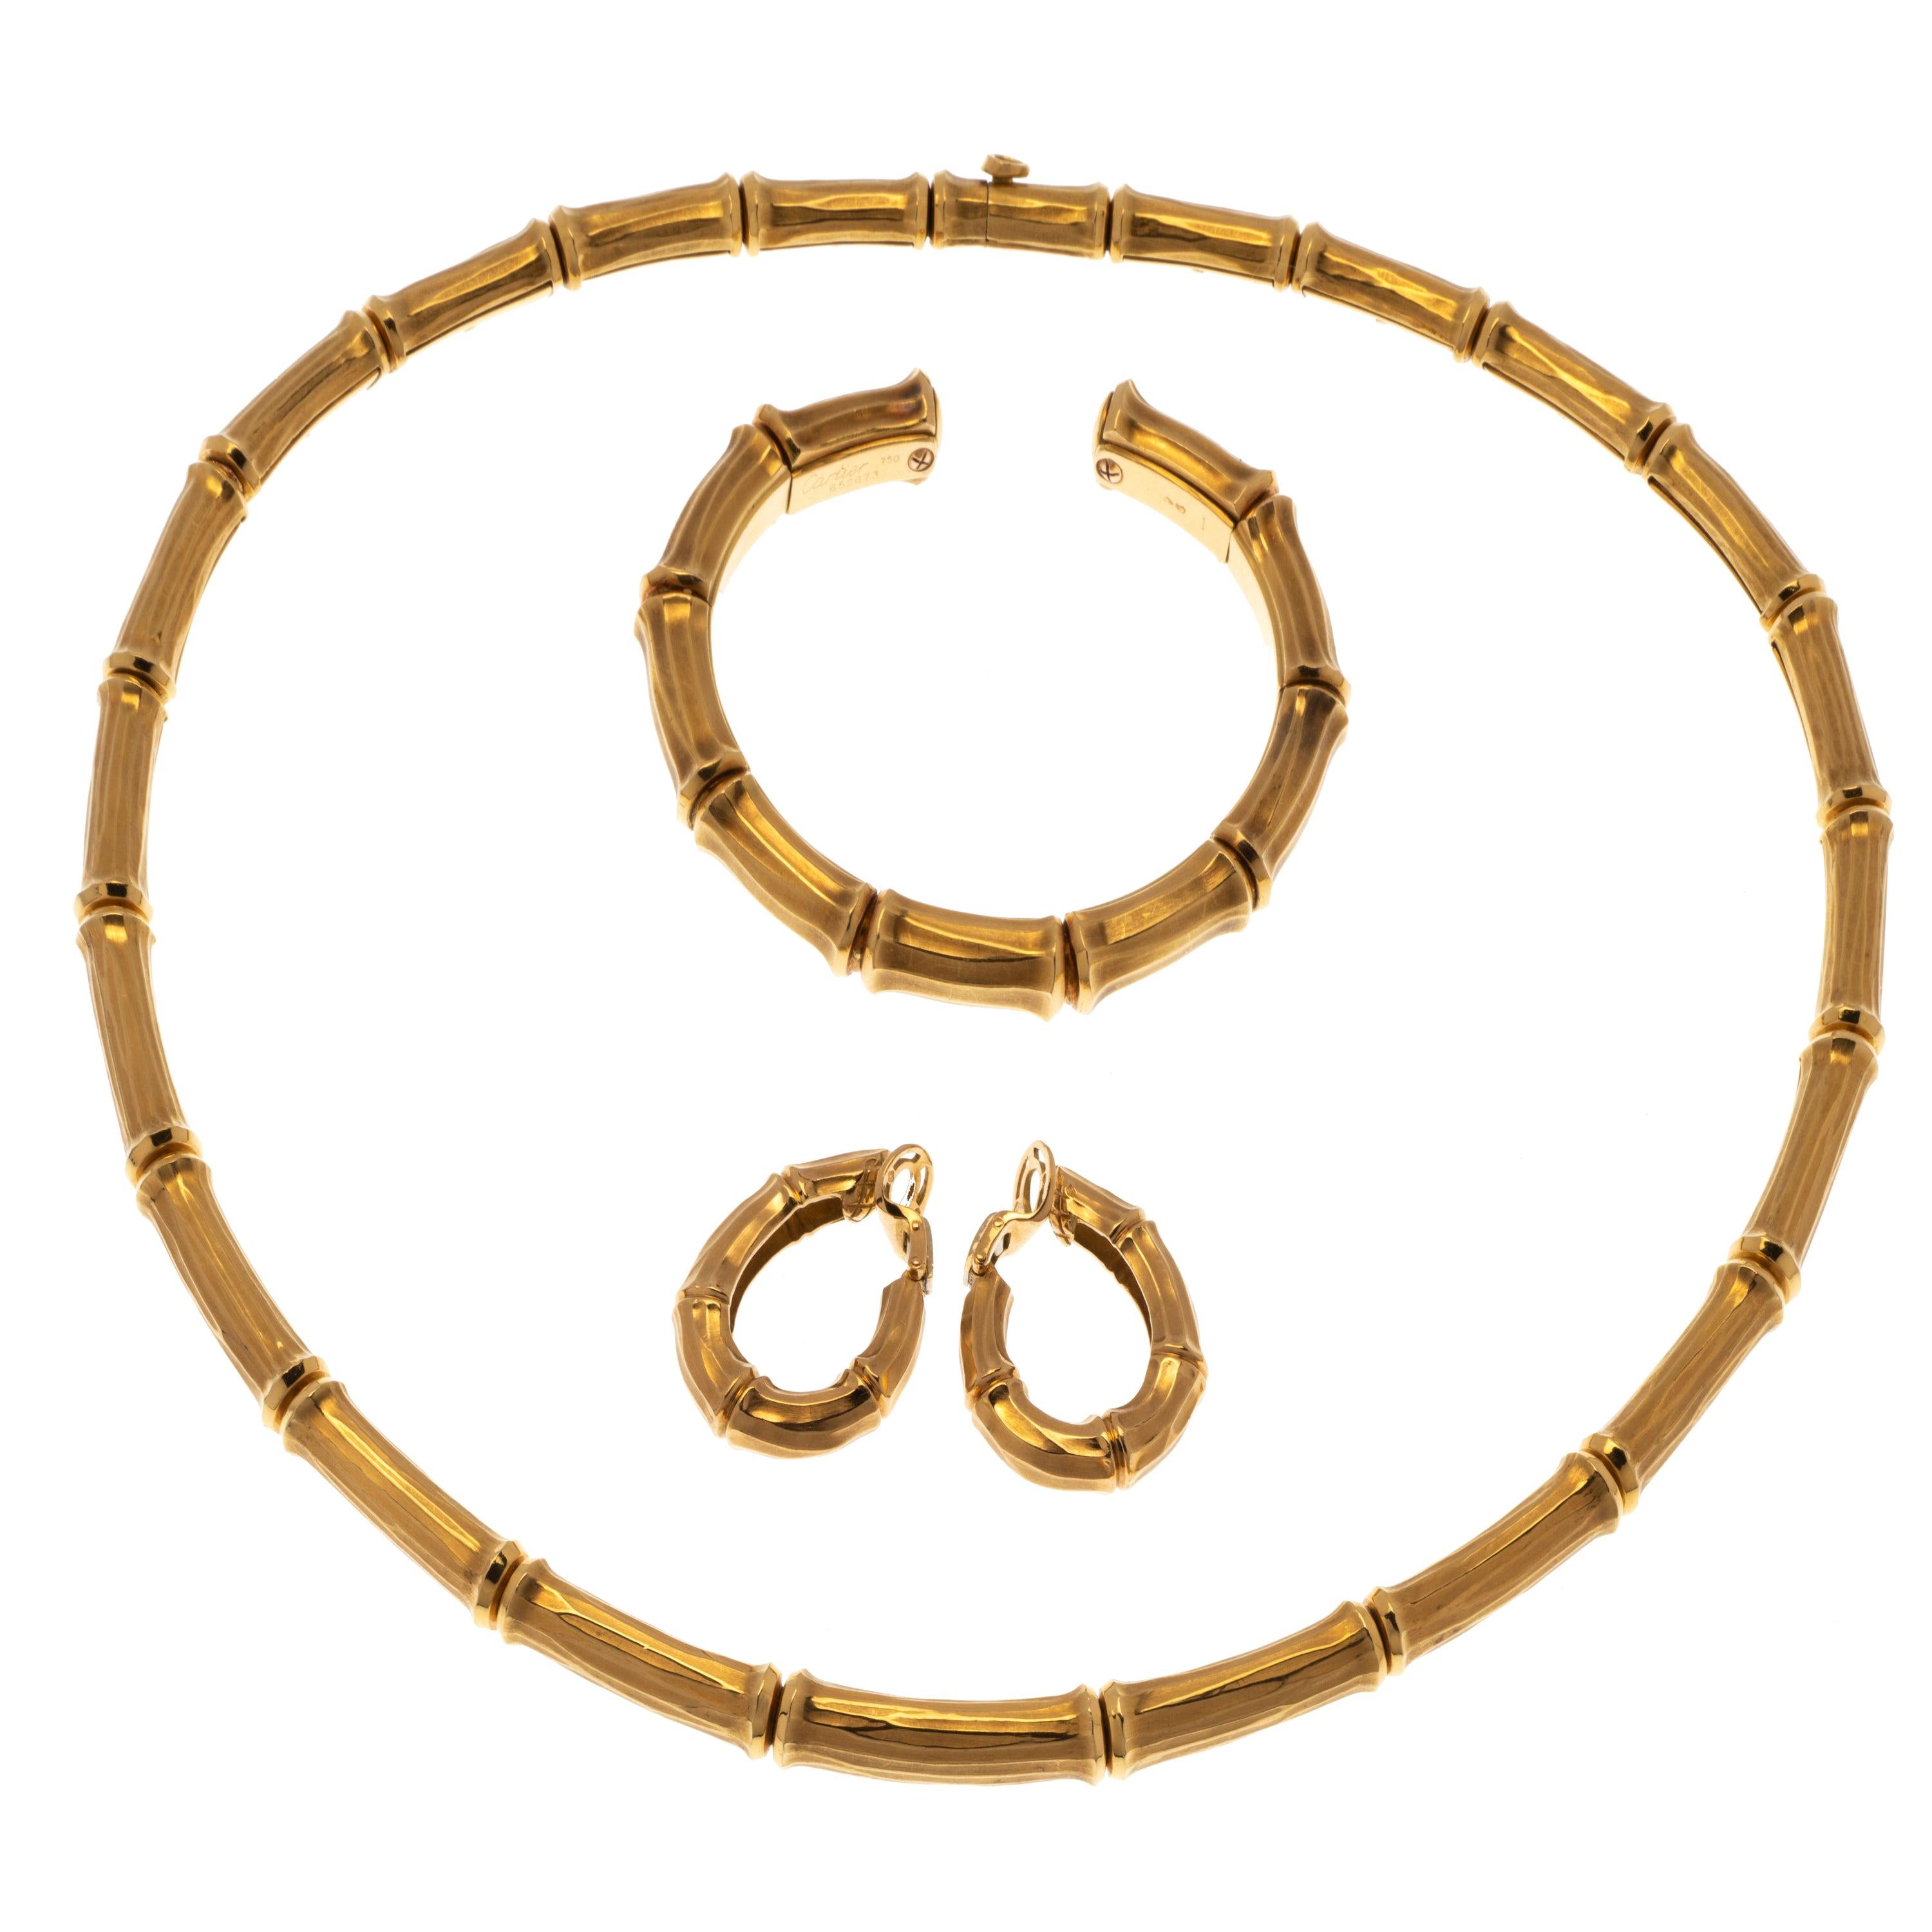 Cartier 18k Gold “Bamboo” Suite